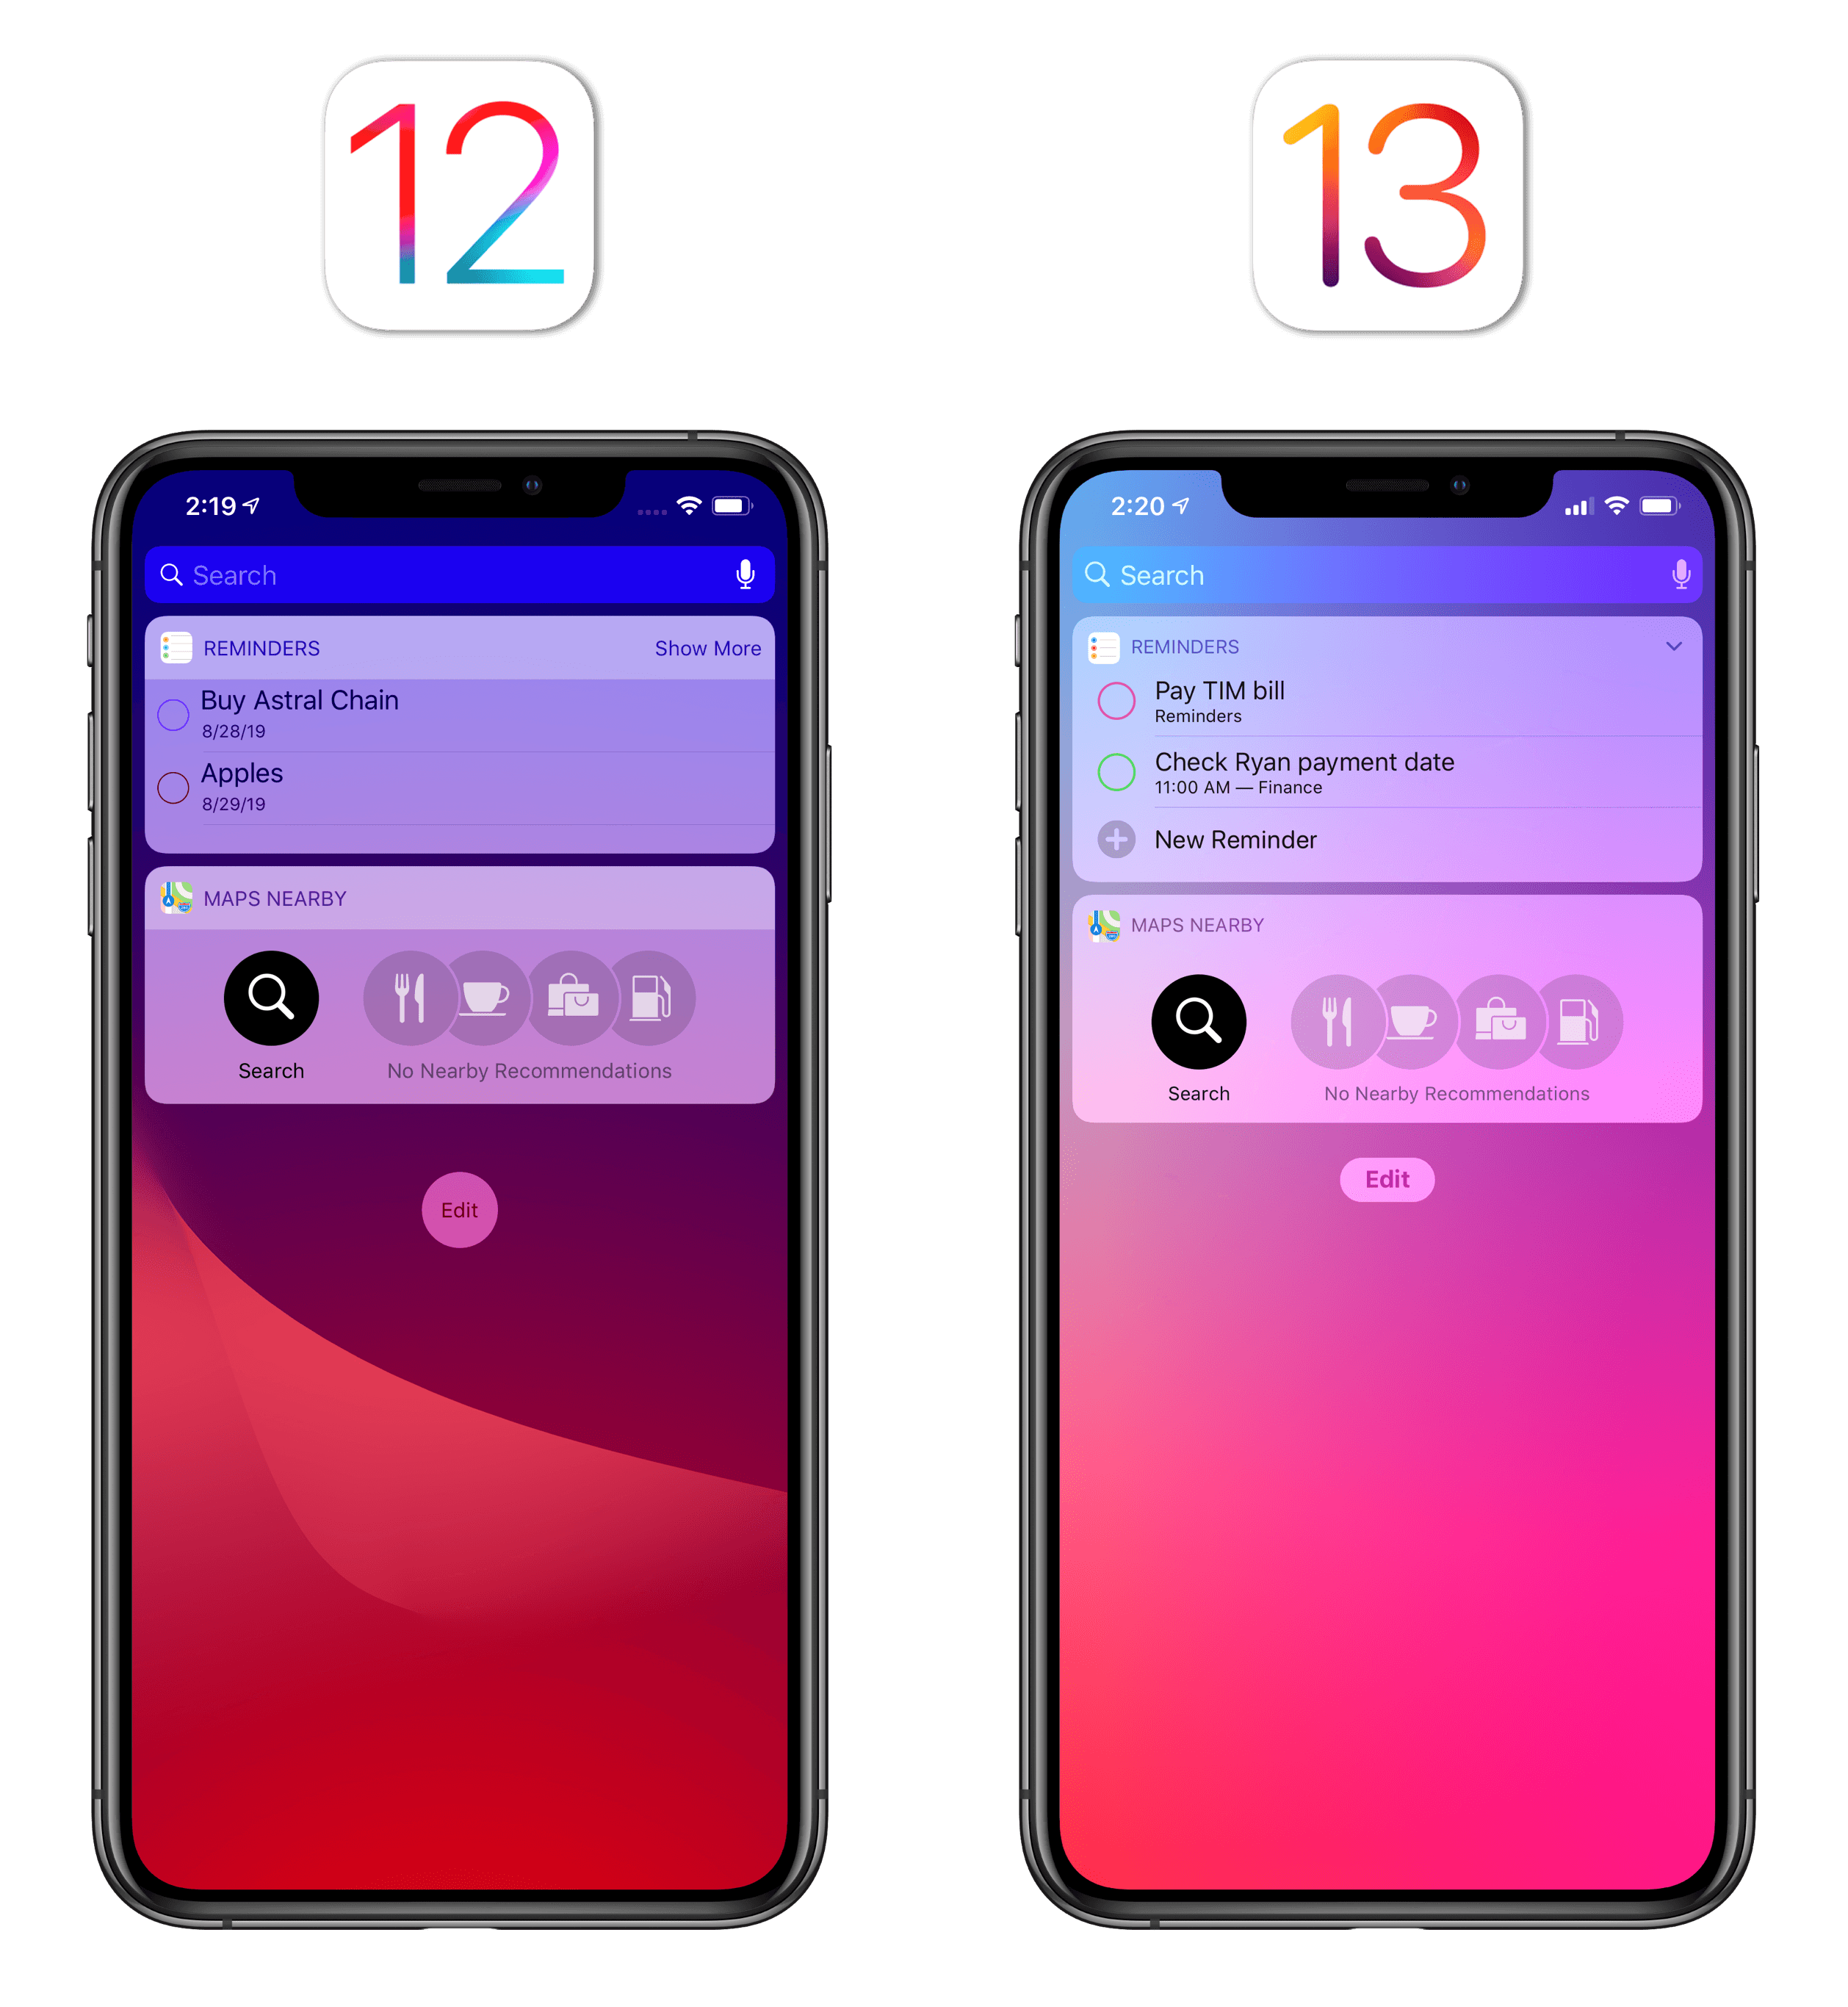 The refreshed look for widgets in iOS 13.